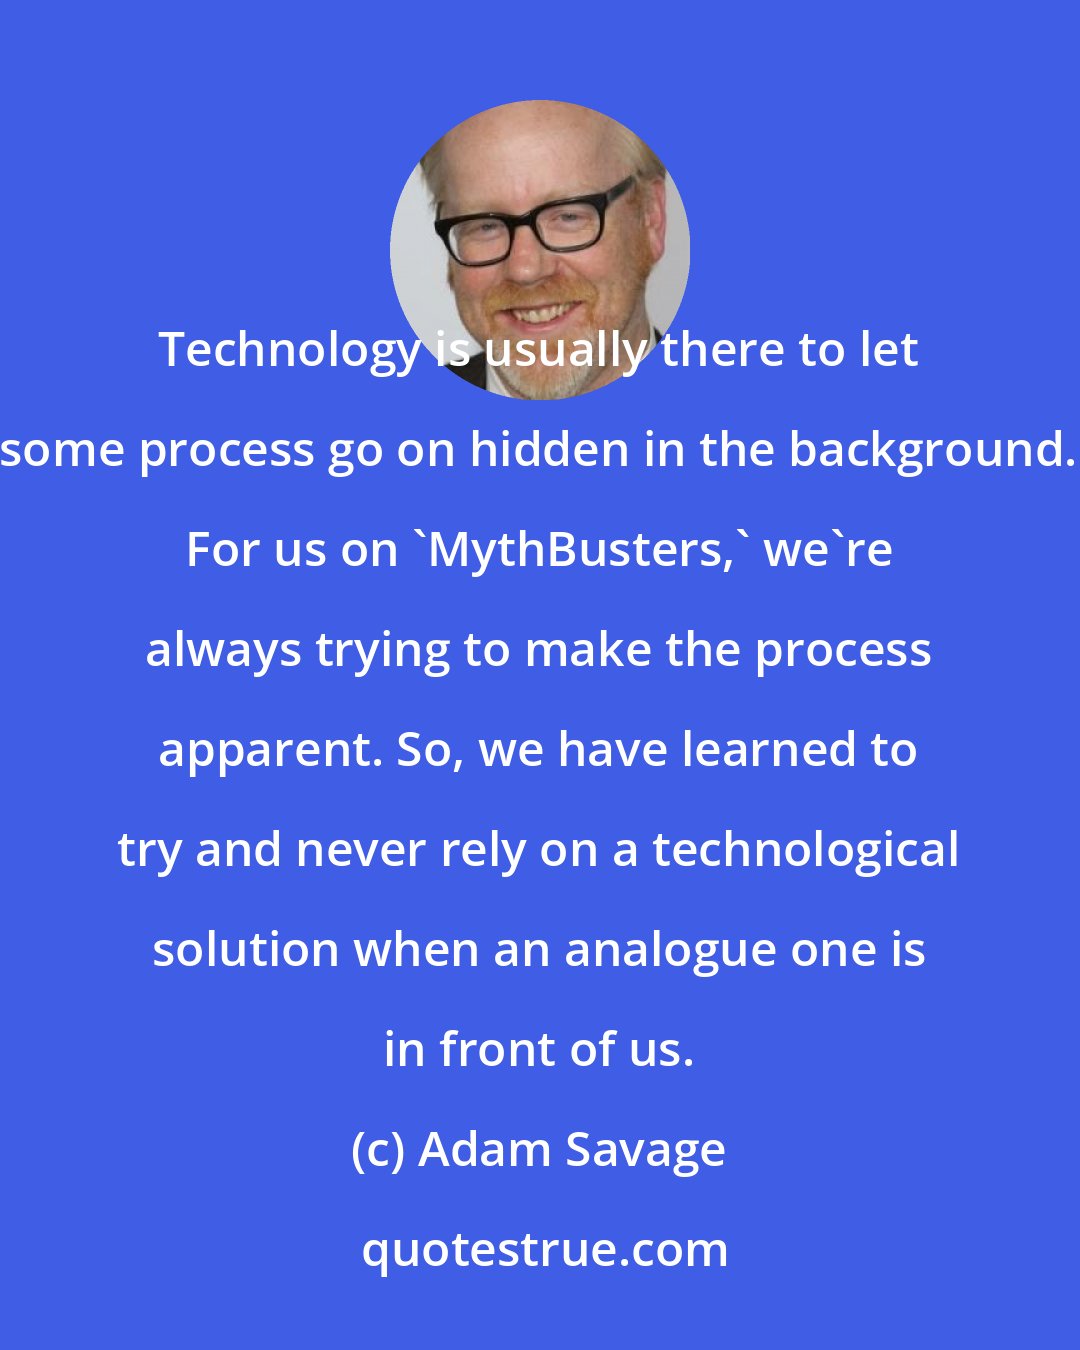 Adam Savage: Technology is usually there to let some process go on hidden in the background. For us on 'MythBusters,' we're always trying to make the process apparent. So, we have learned to try and never rely on a technological solution when an analogue one is in front of us.